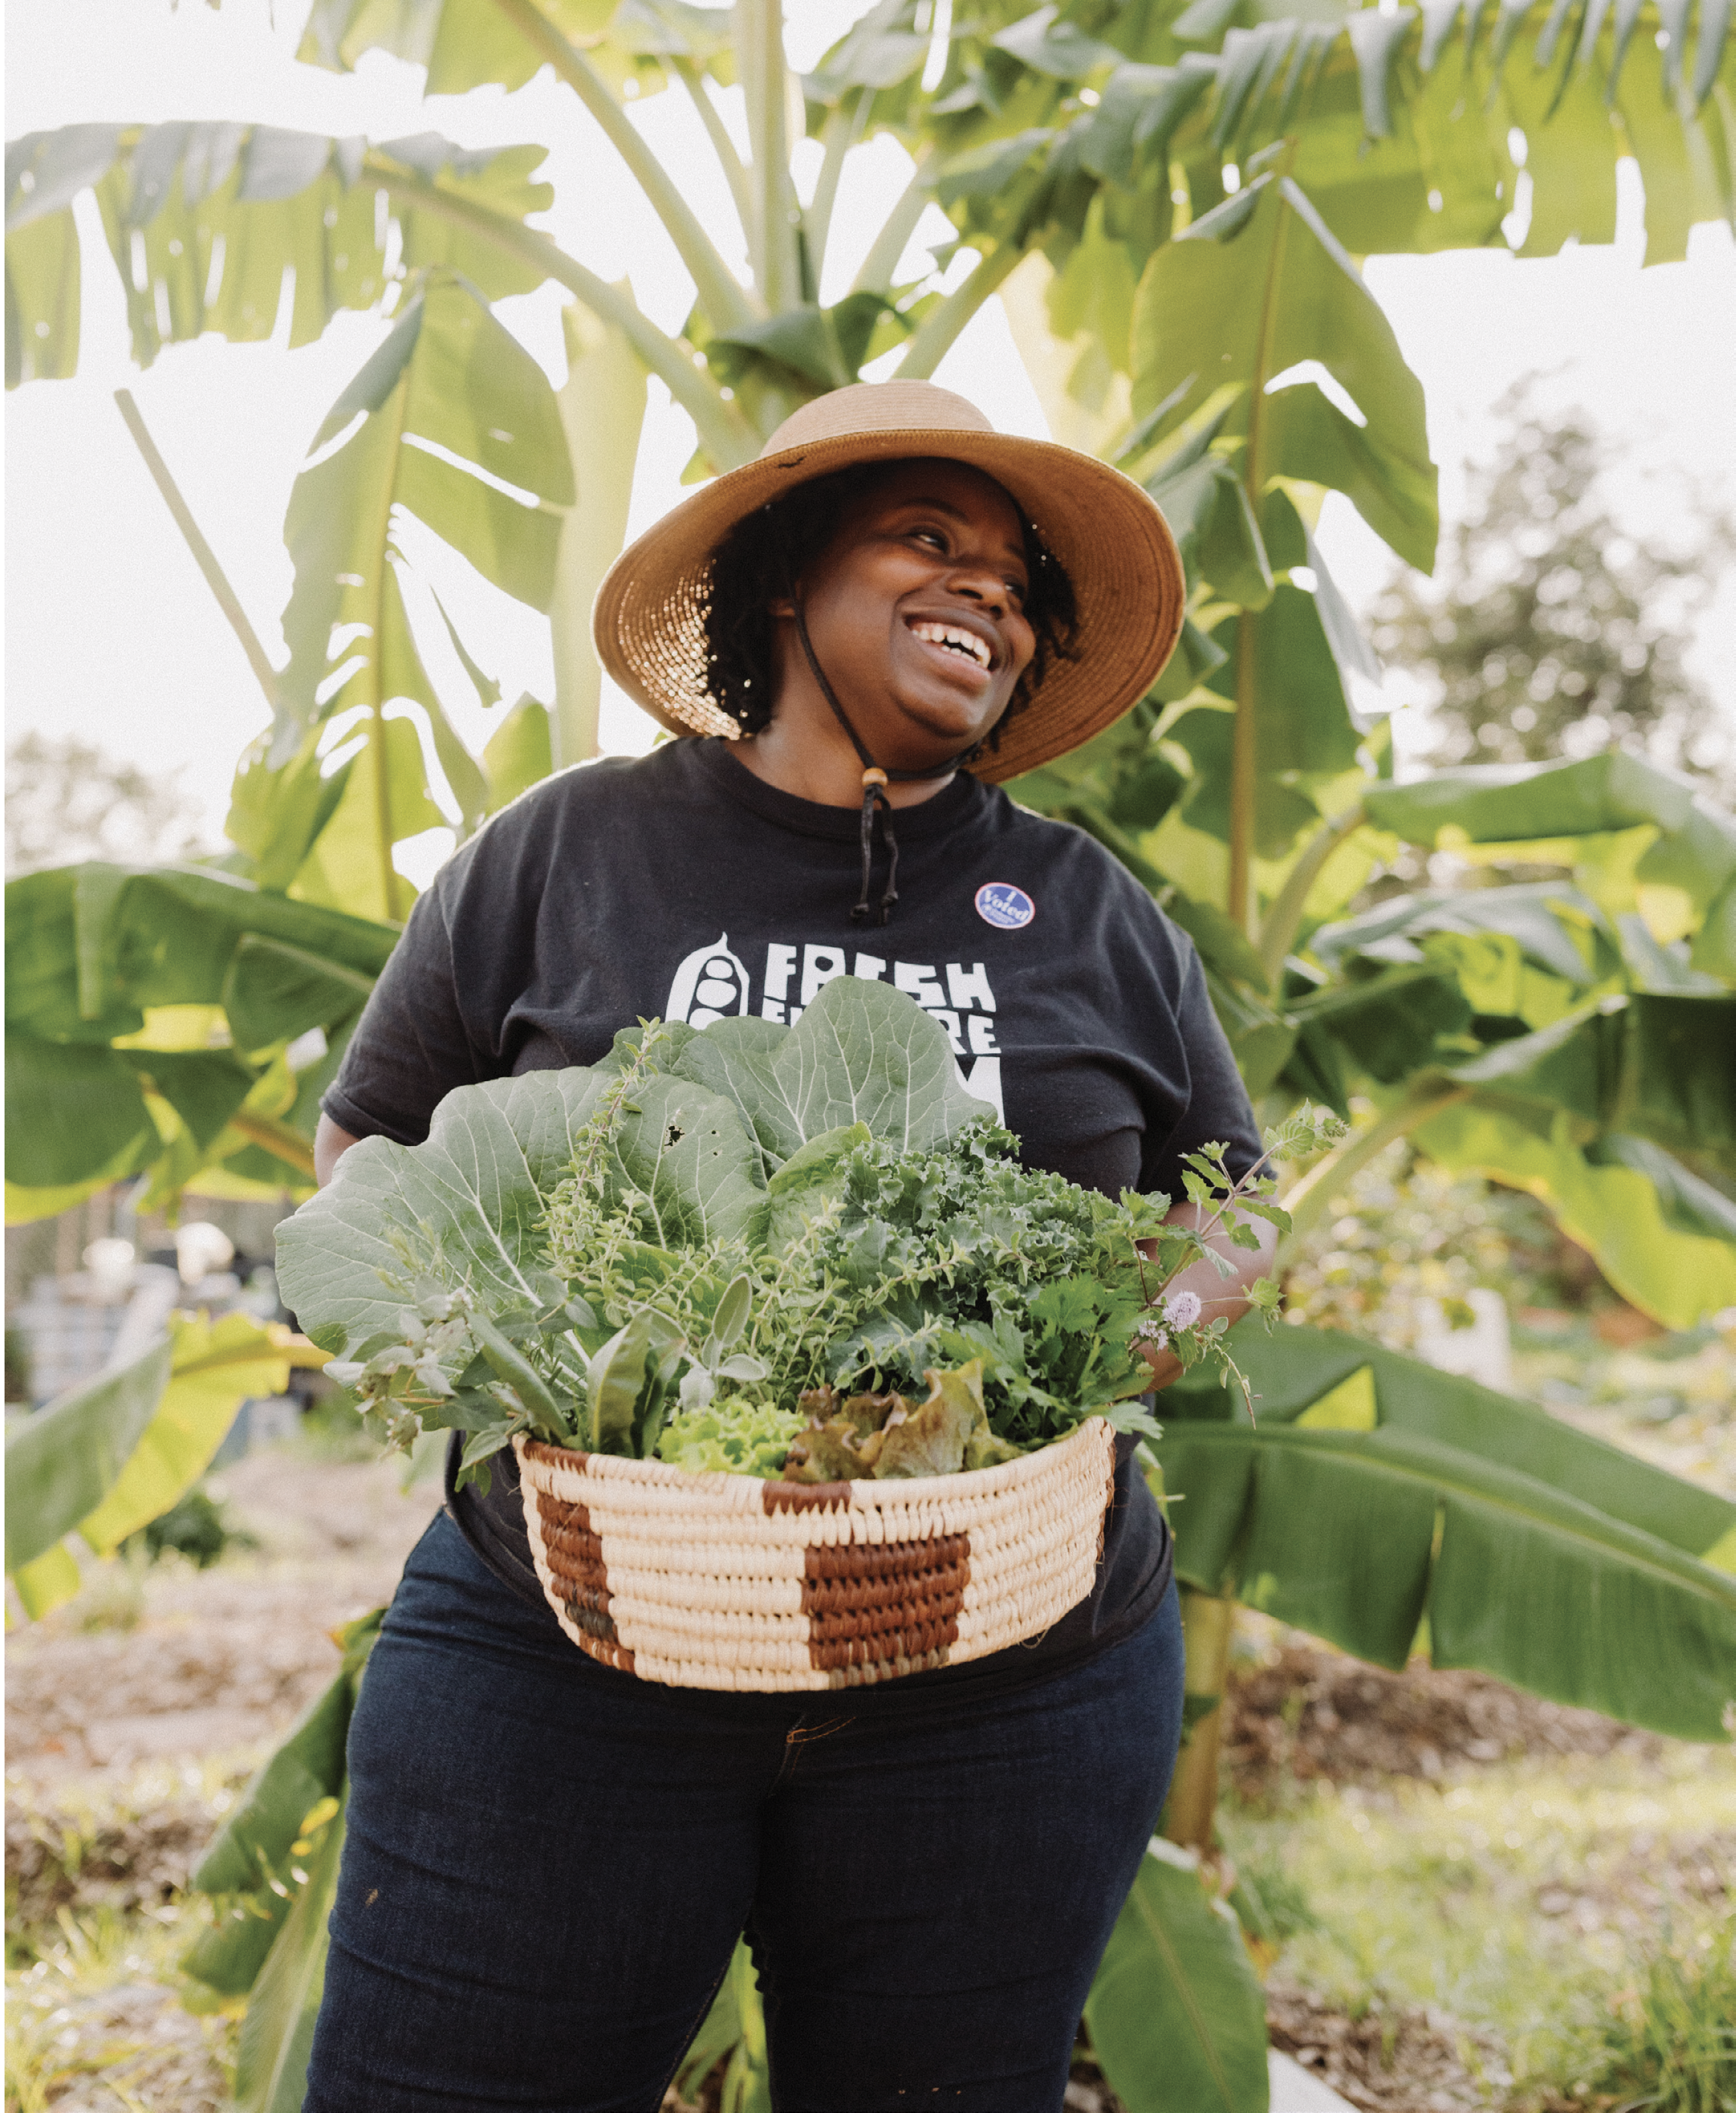 Farmer and community visionary Germaine Jenkins revels in a harvest of healthy greens from her North Charleston nonprofit, Fresh Future Farm.